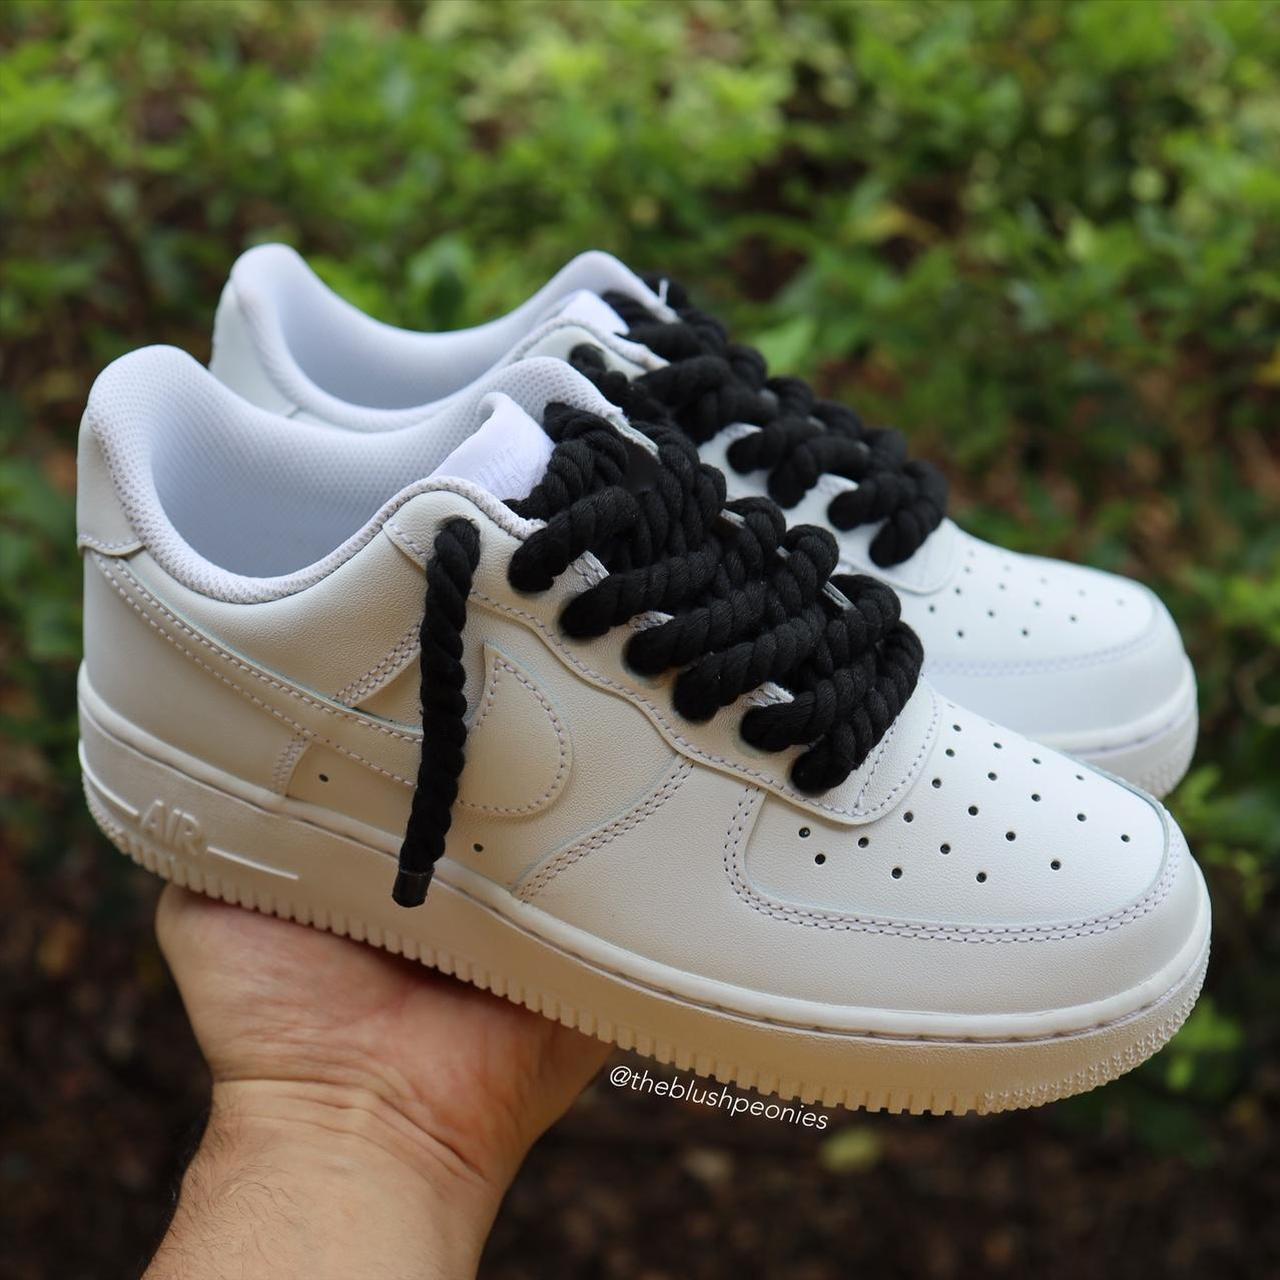 Nike Air Force One White, With Black Laces 